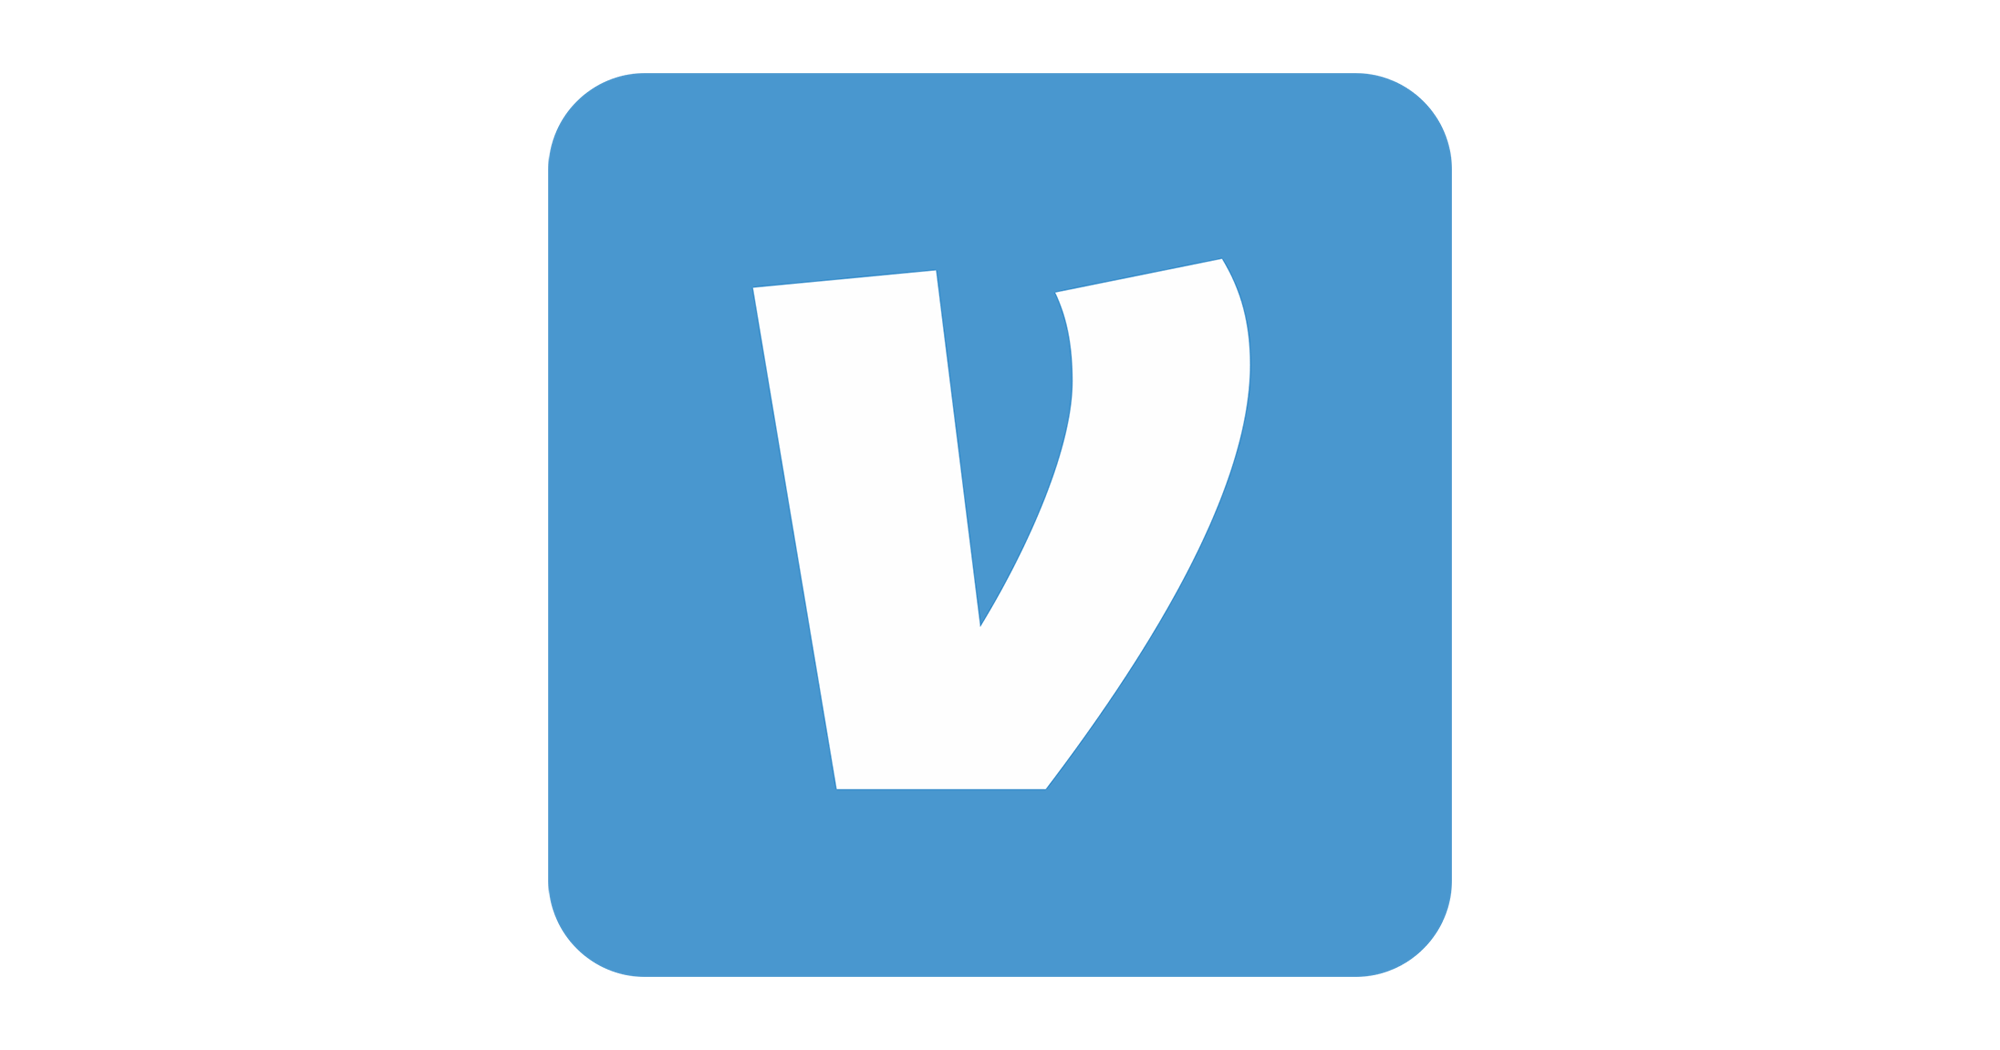 Pay with Venmo Logo - Zelle US Banks Mobile Payments - Venmo Competitor